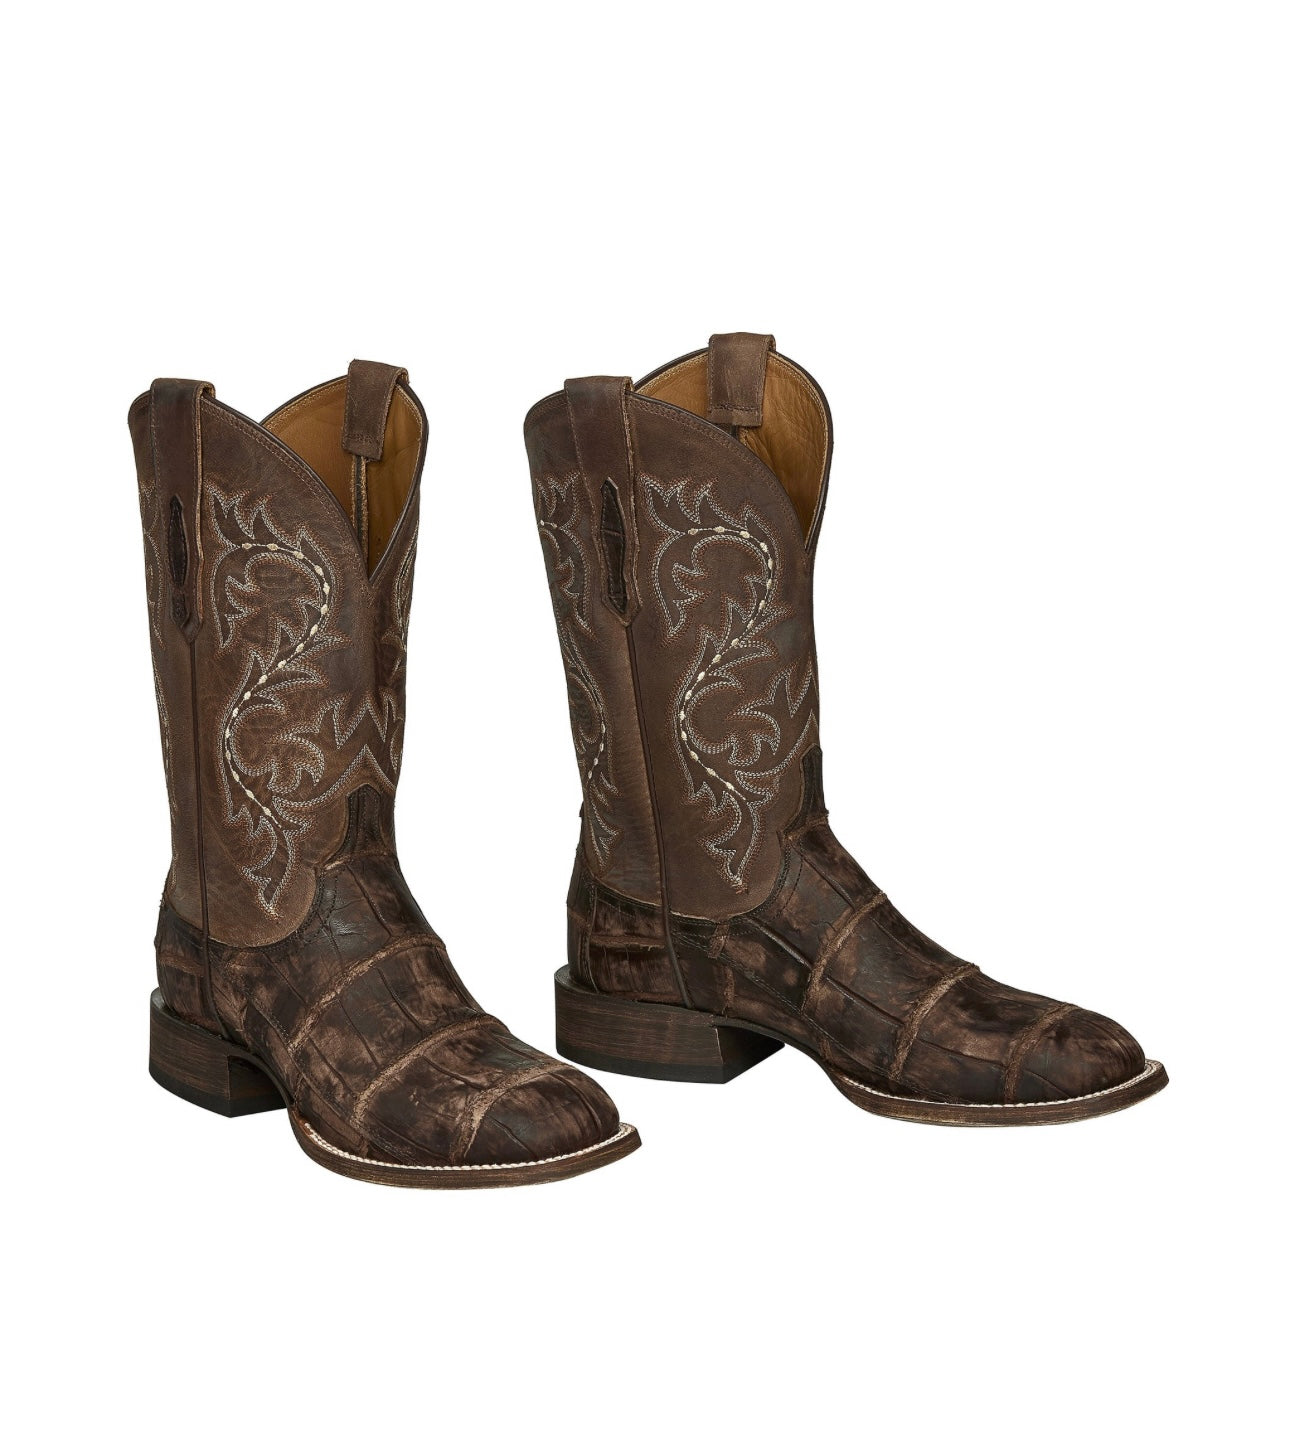 LUCCHESE “Malcolm” Giant Gator Boots